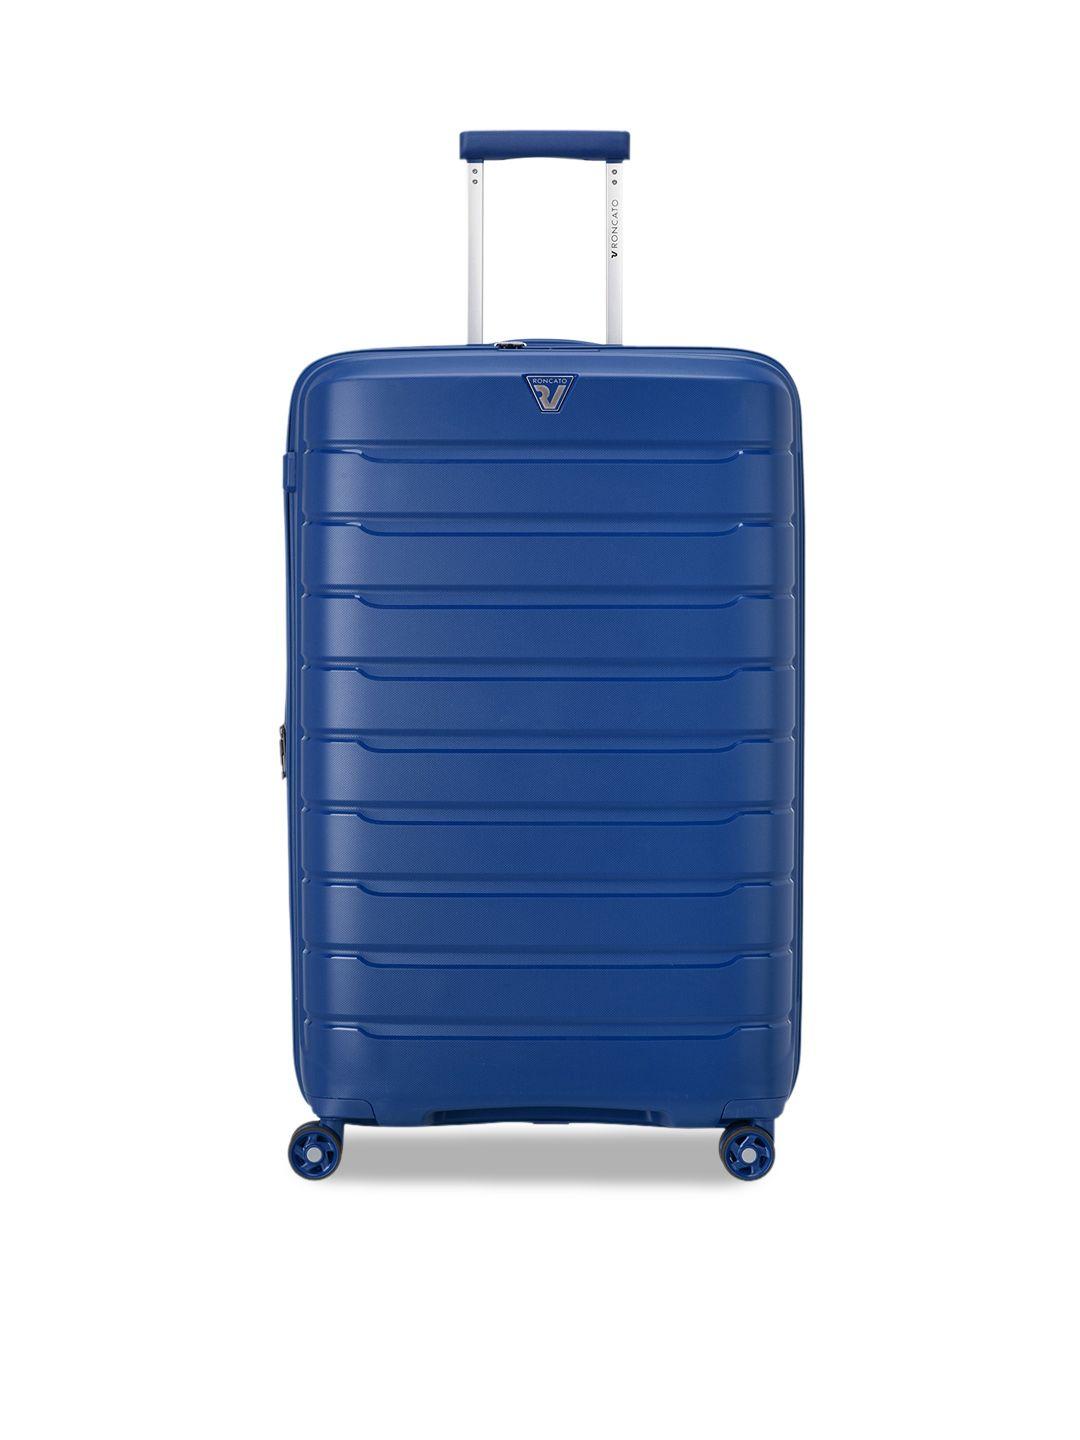 roncato butterfly textured hard-sided large trolley suitcase